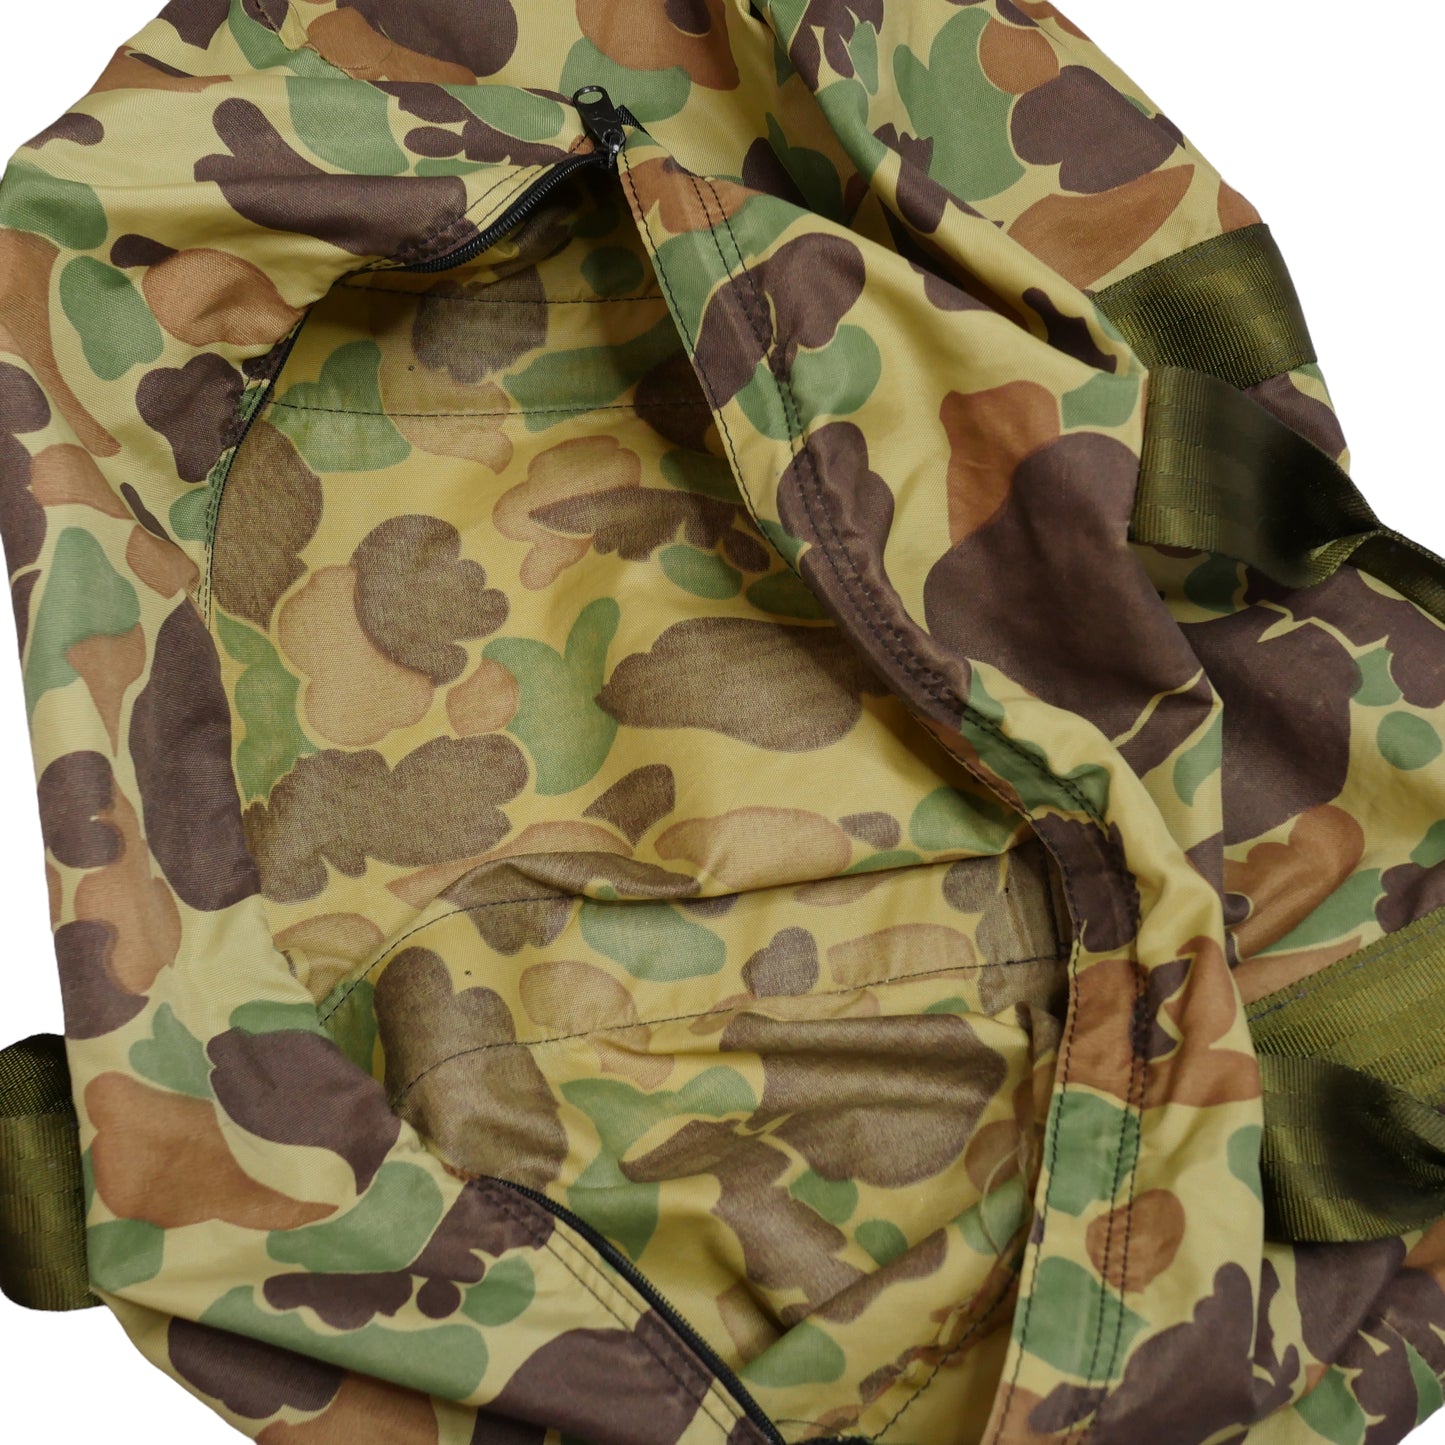 Outdoor Products Camo Duffle Bag